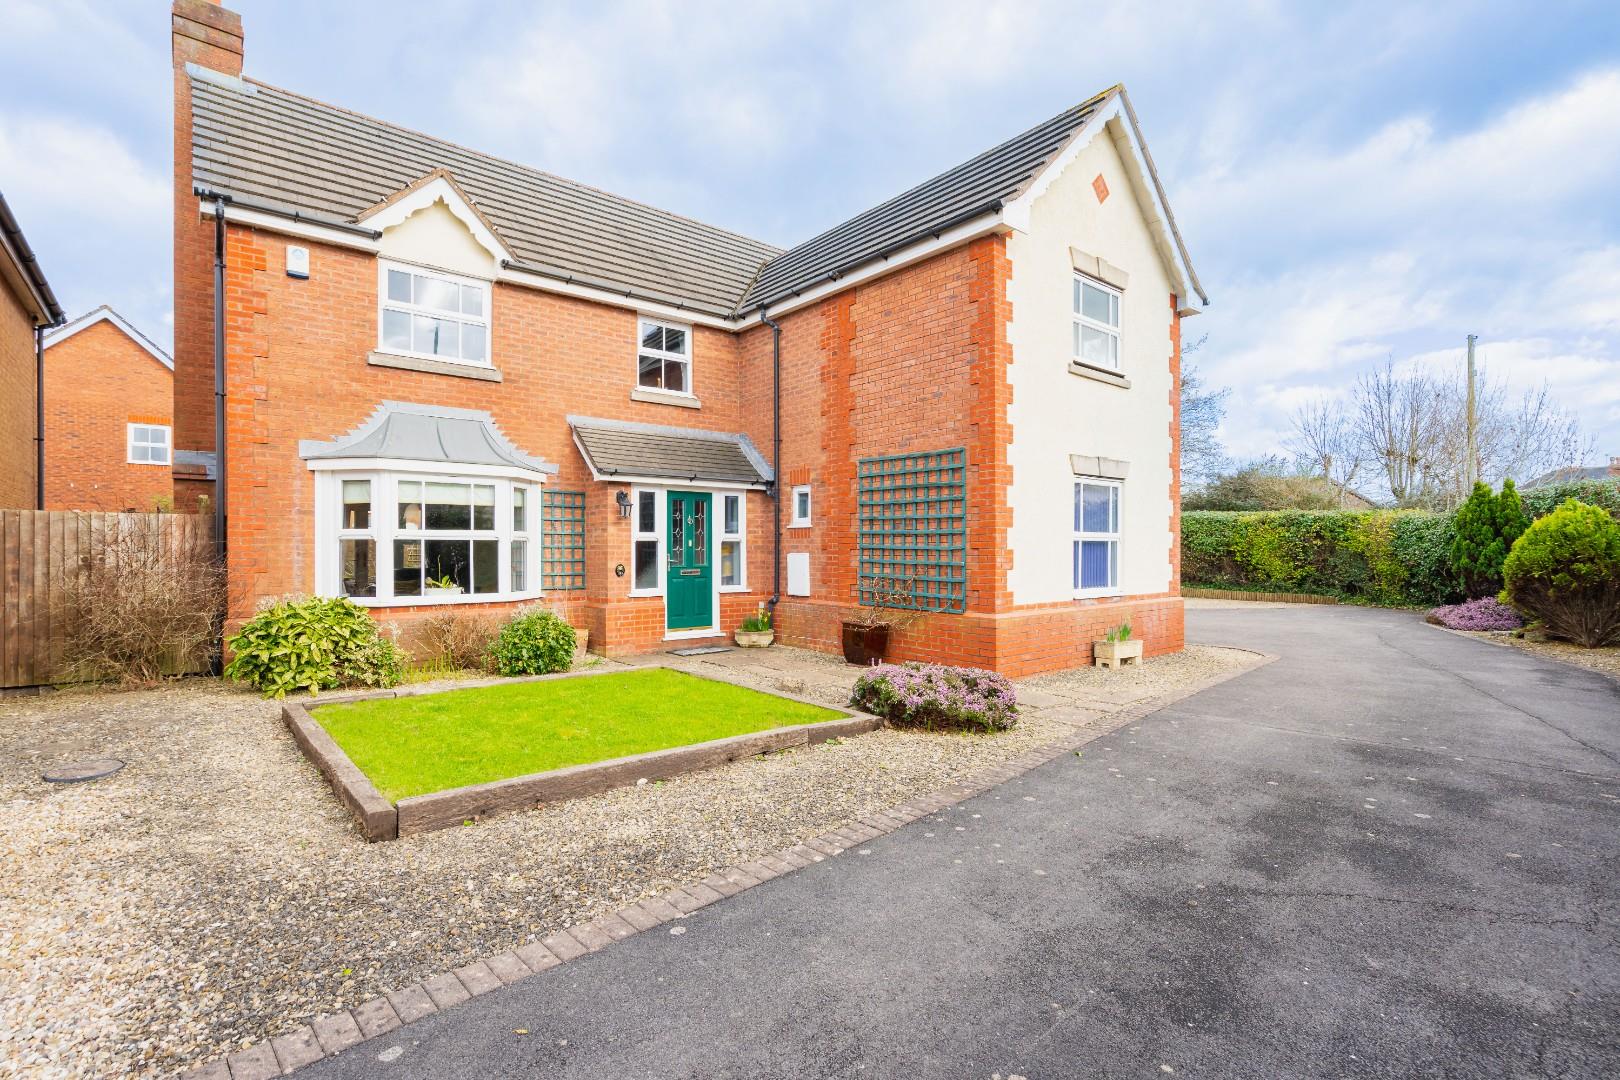 Exceptional family residence in Yatton's North End